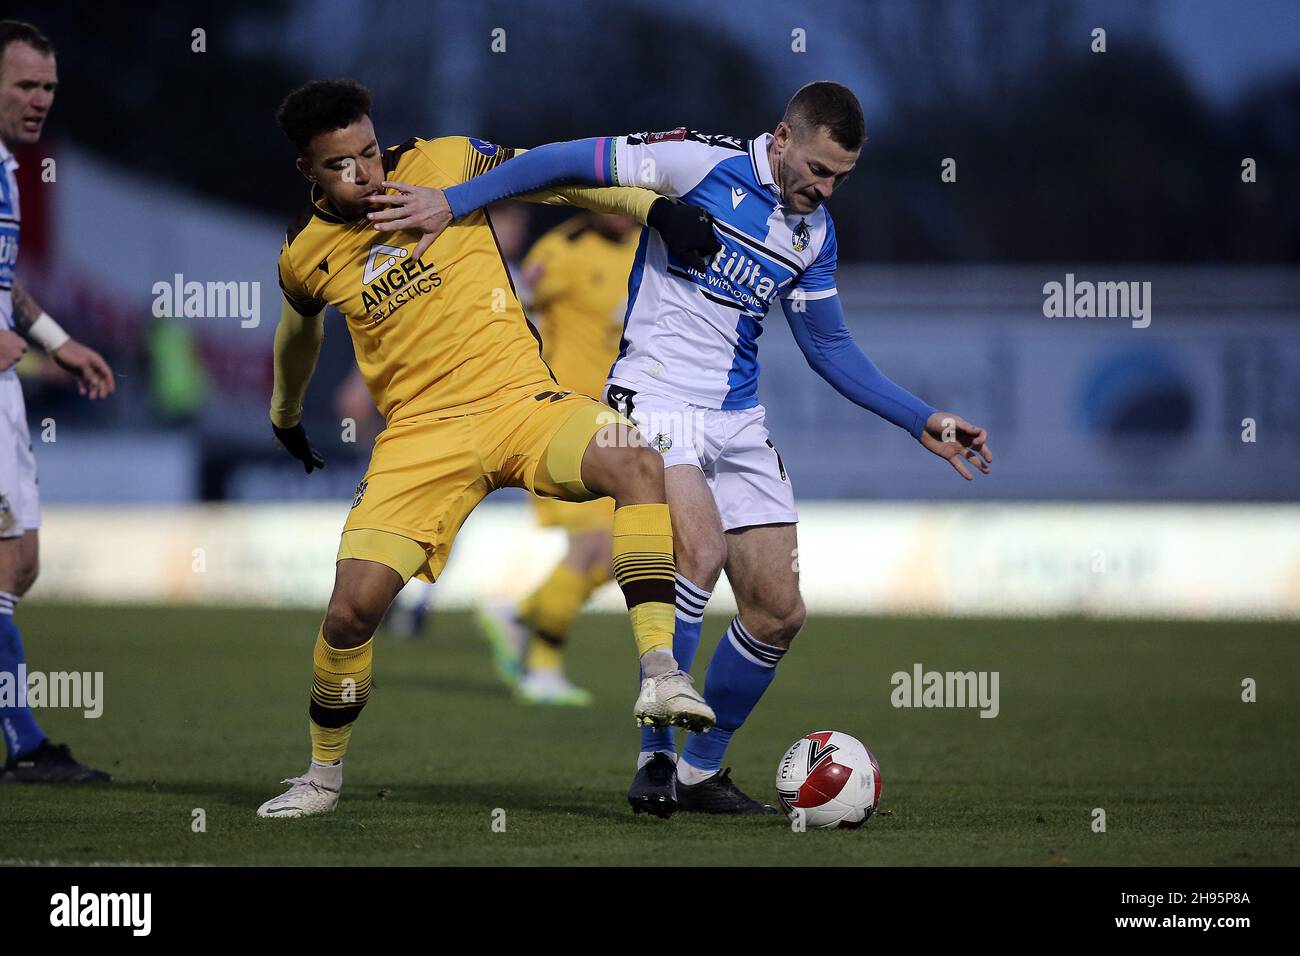 Bristol, UK. 04th Dec, 2021. Donovan Wilson of Sutton United and Paul Coutts of Bristol Rovers during the FA Cup 2nd round match between Bristol Rovers and Sutton United at the Memorial Stadium, Bristol, England on 4 December 2021. Photo by Dave Peters/PRiME Media Images. Credit: PRiME Media Images/Alamy Live News Stock Photo